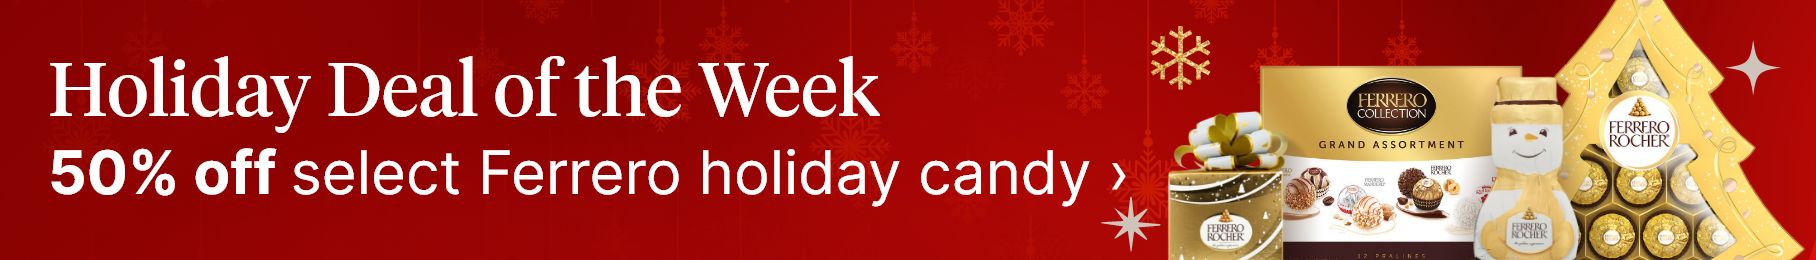 Holiday deal of the week. 50% off select Ferrero holiday candy.